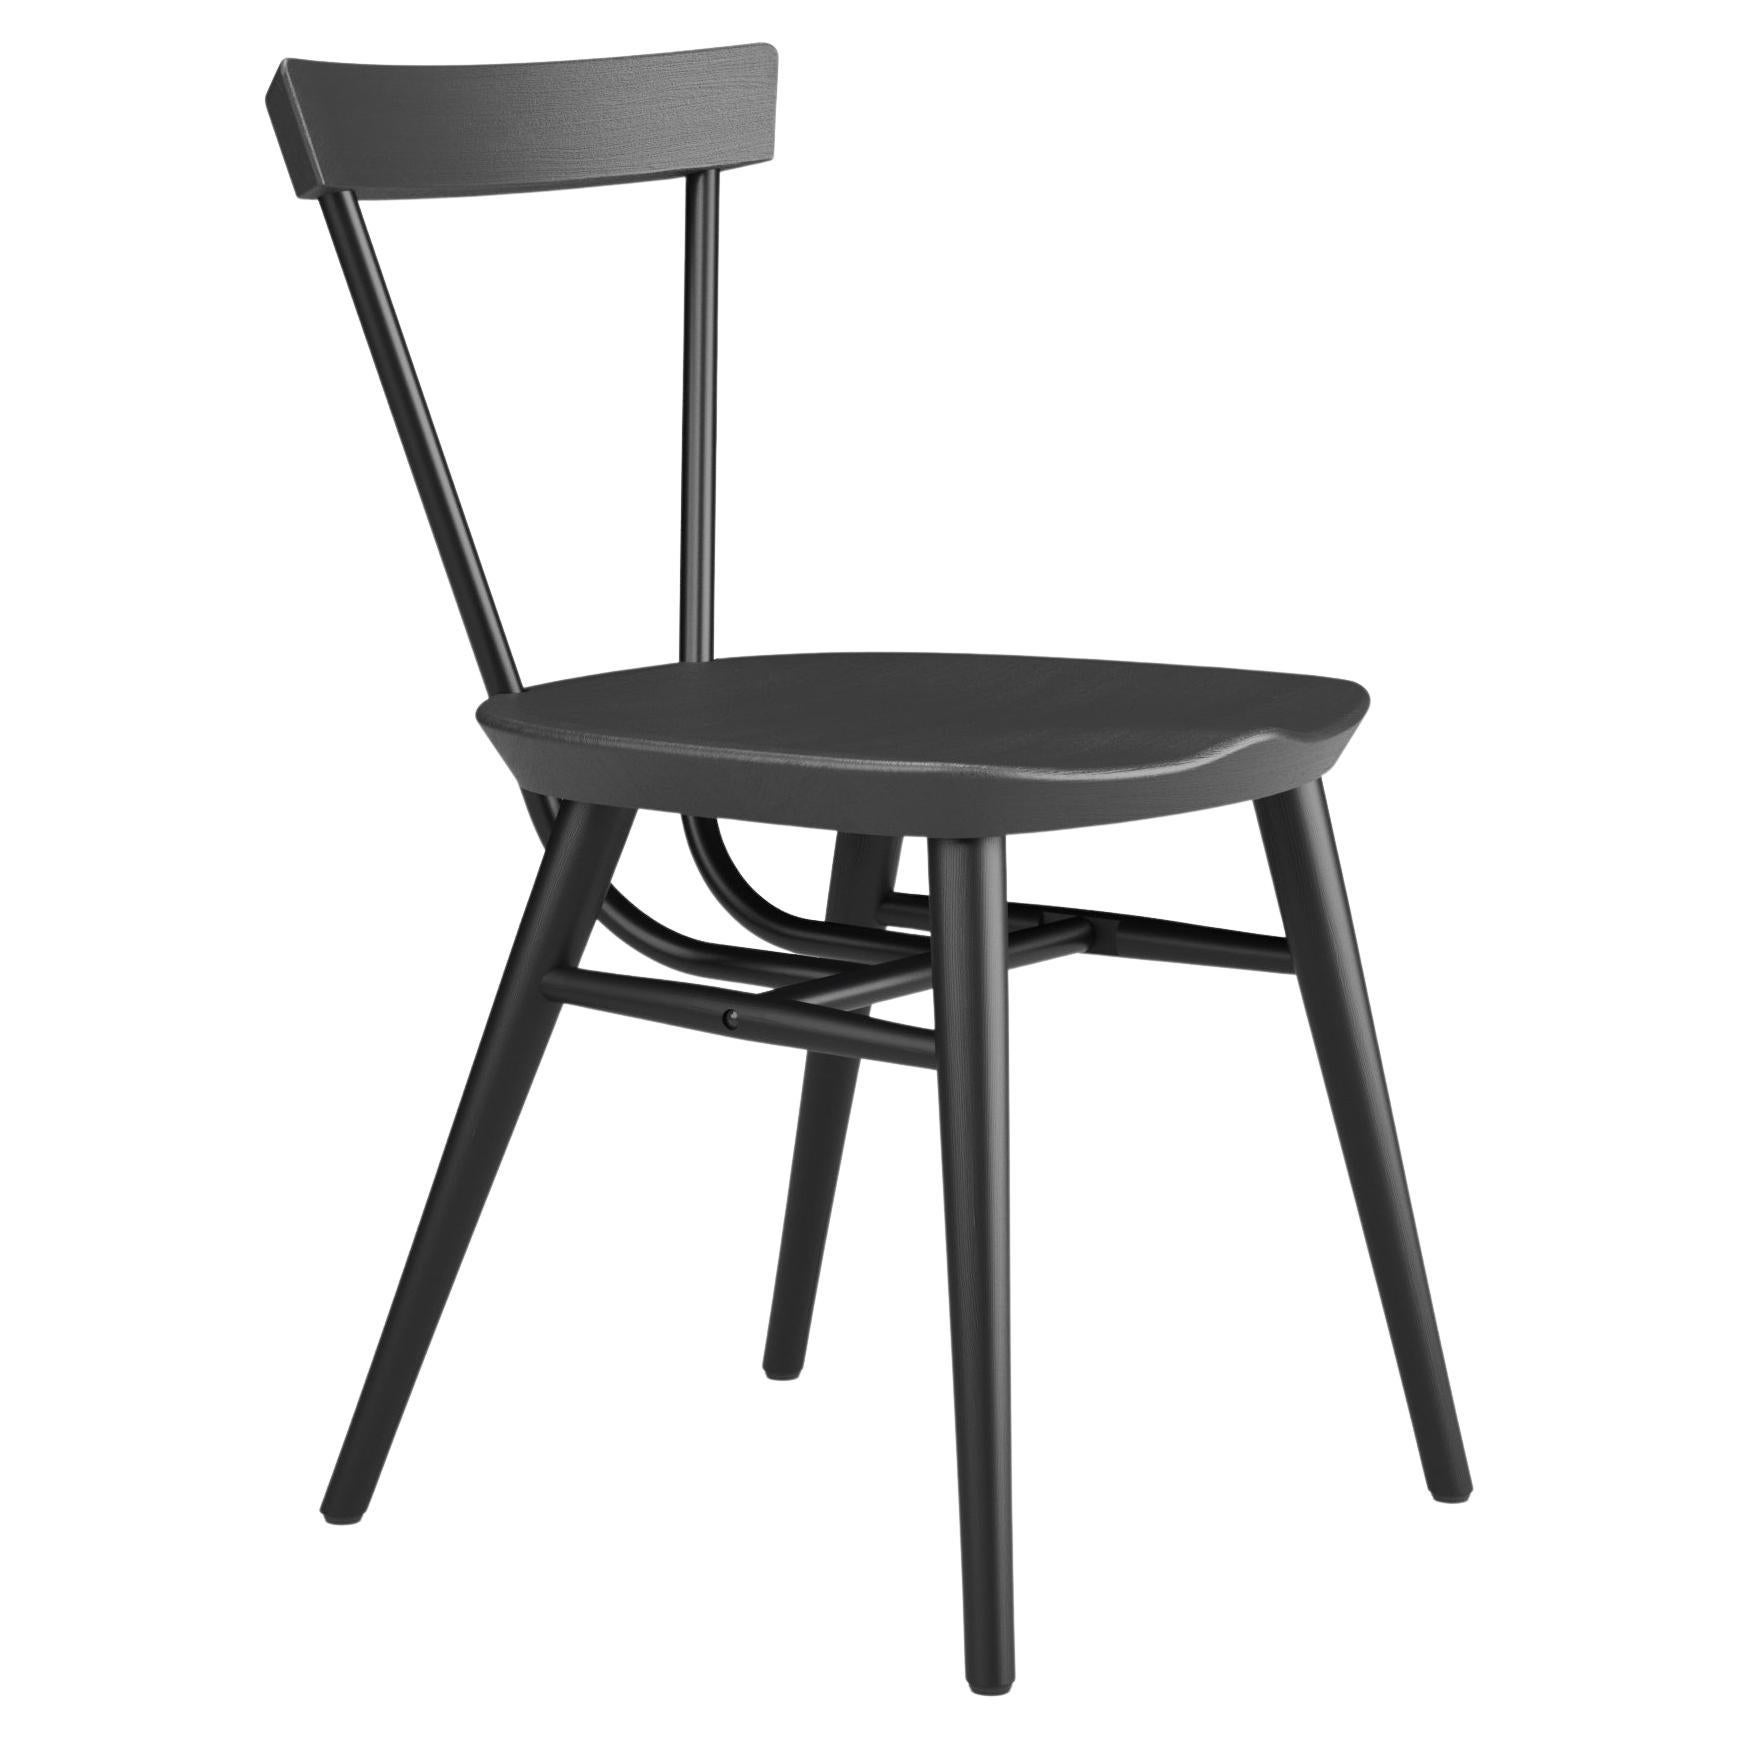 Hayche, W Tube Chair - Black, United Kingdom, Made To Order For Sale